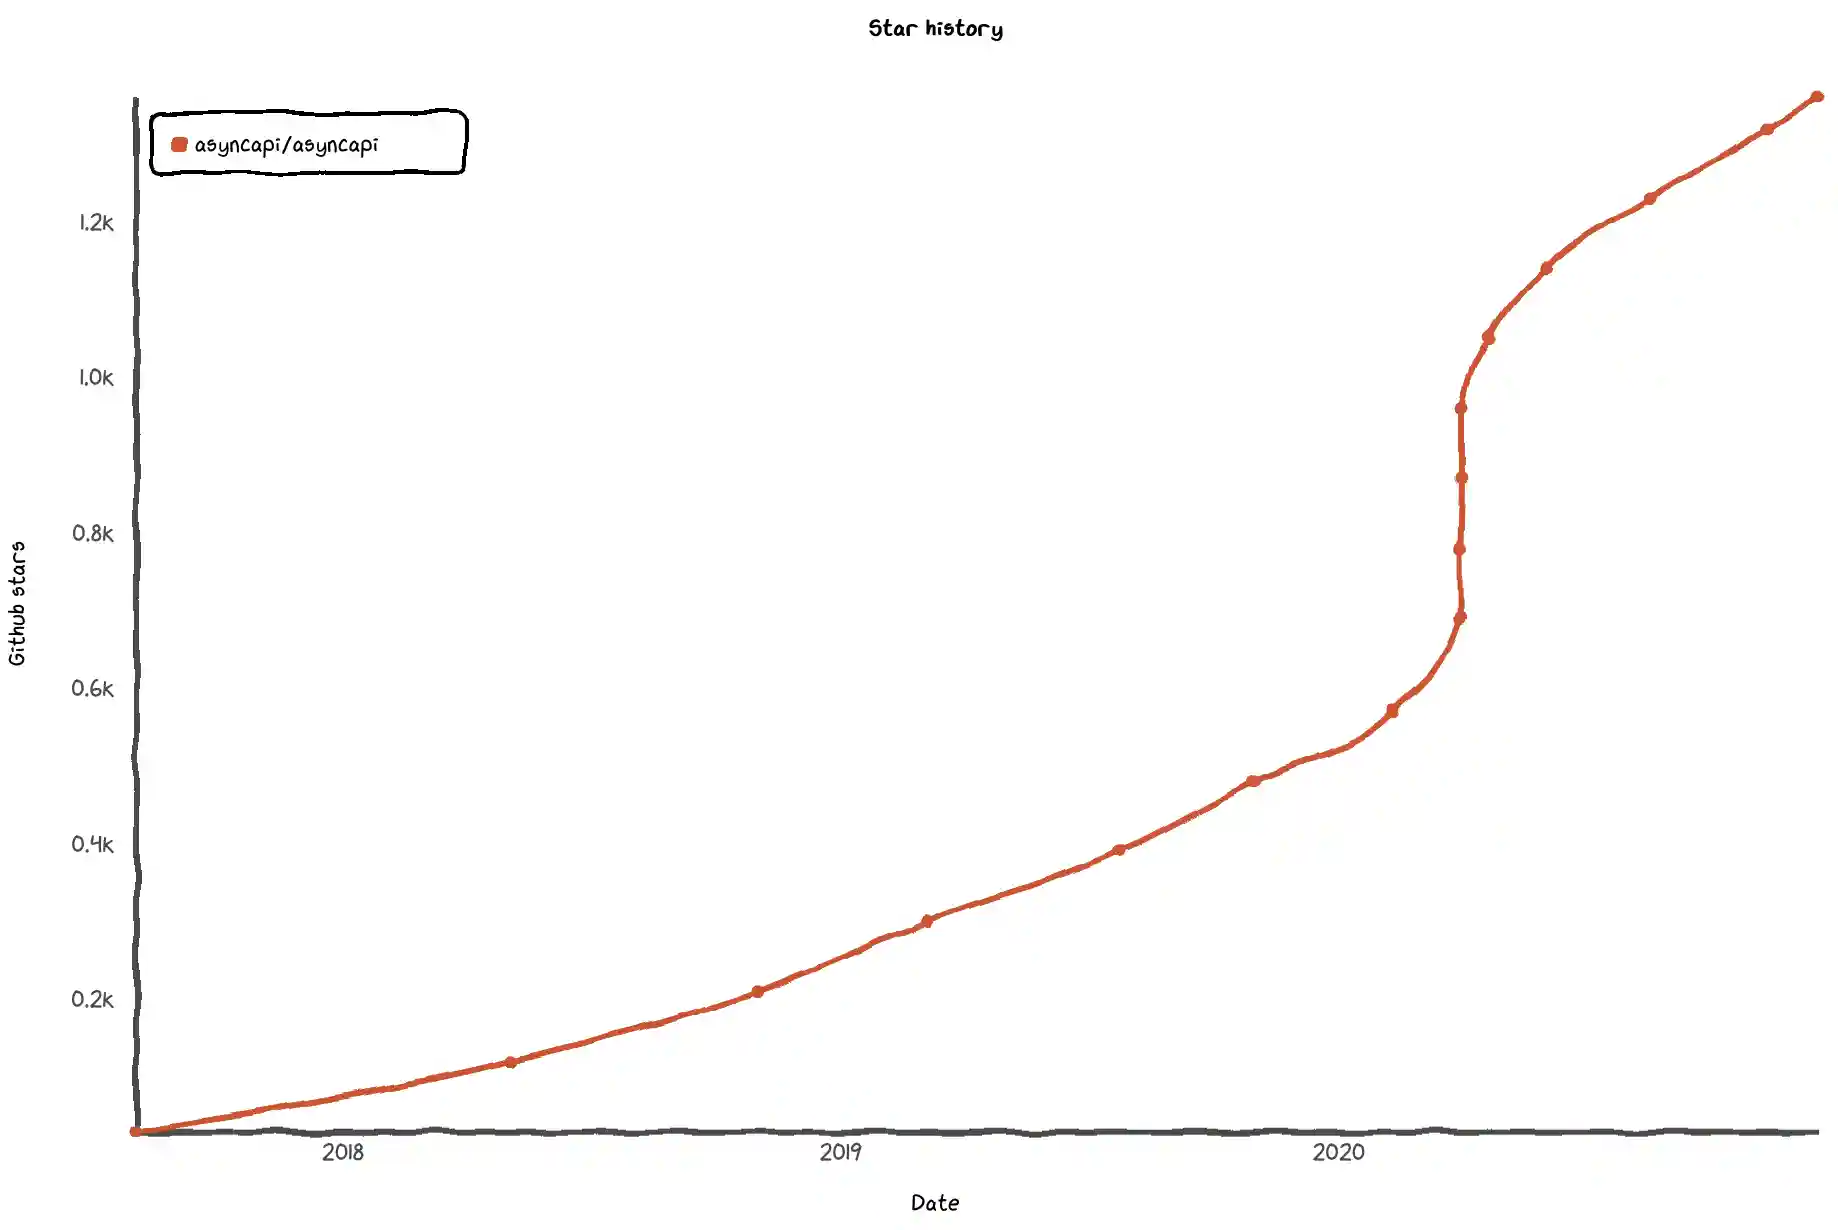 Figure 6: GitHub stars growth in asyncapi repository